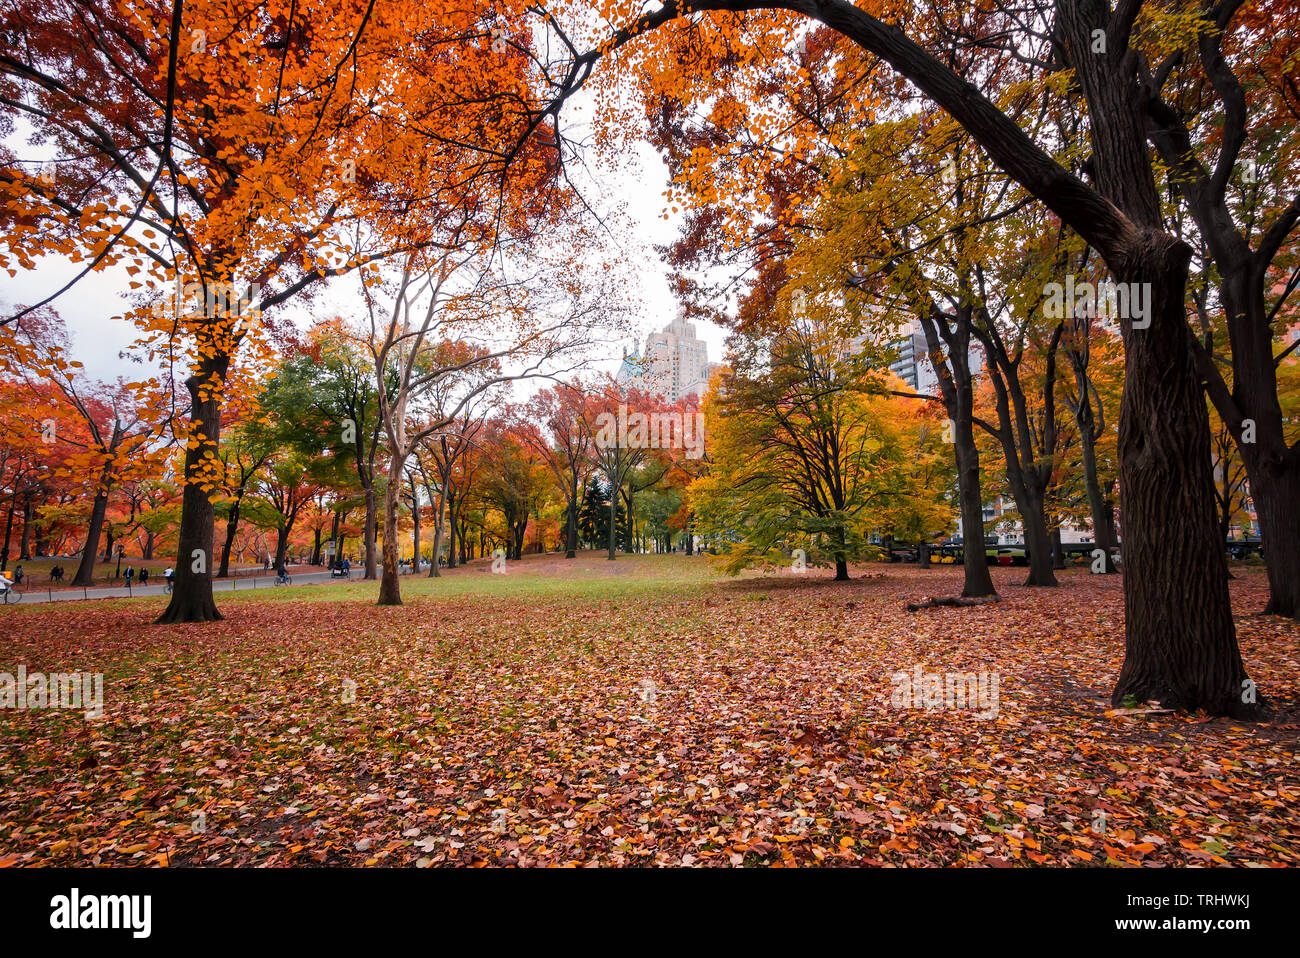 Scene at Central Park's south side on a cloudy autumn day Stock Photo